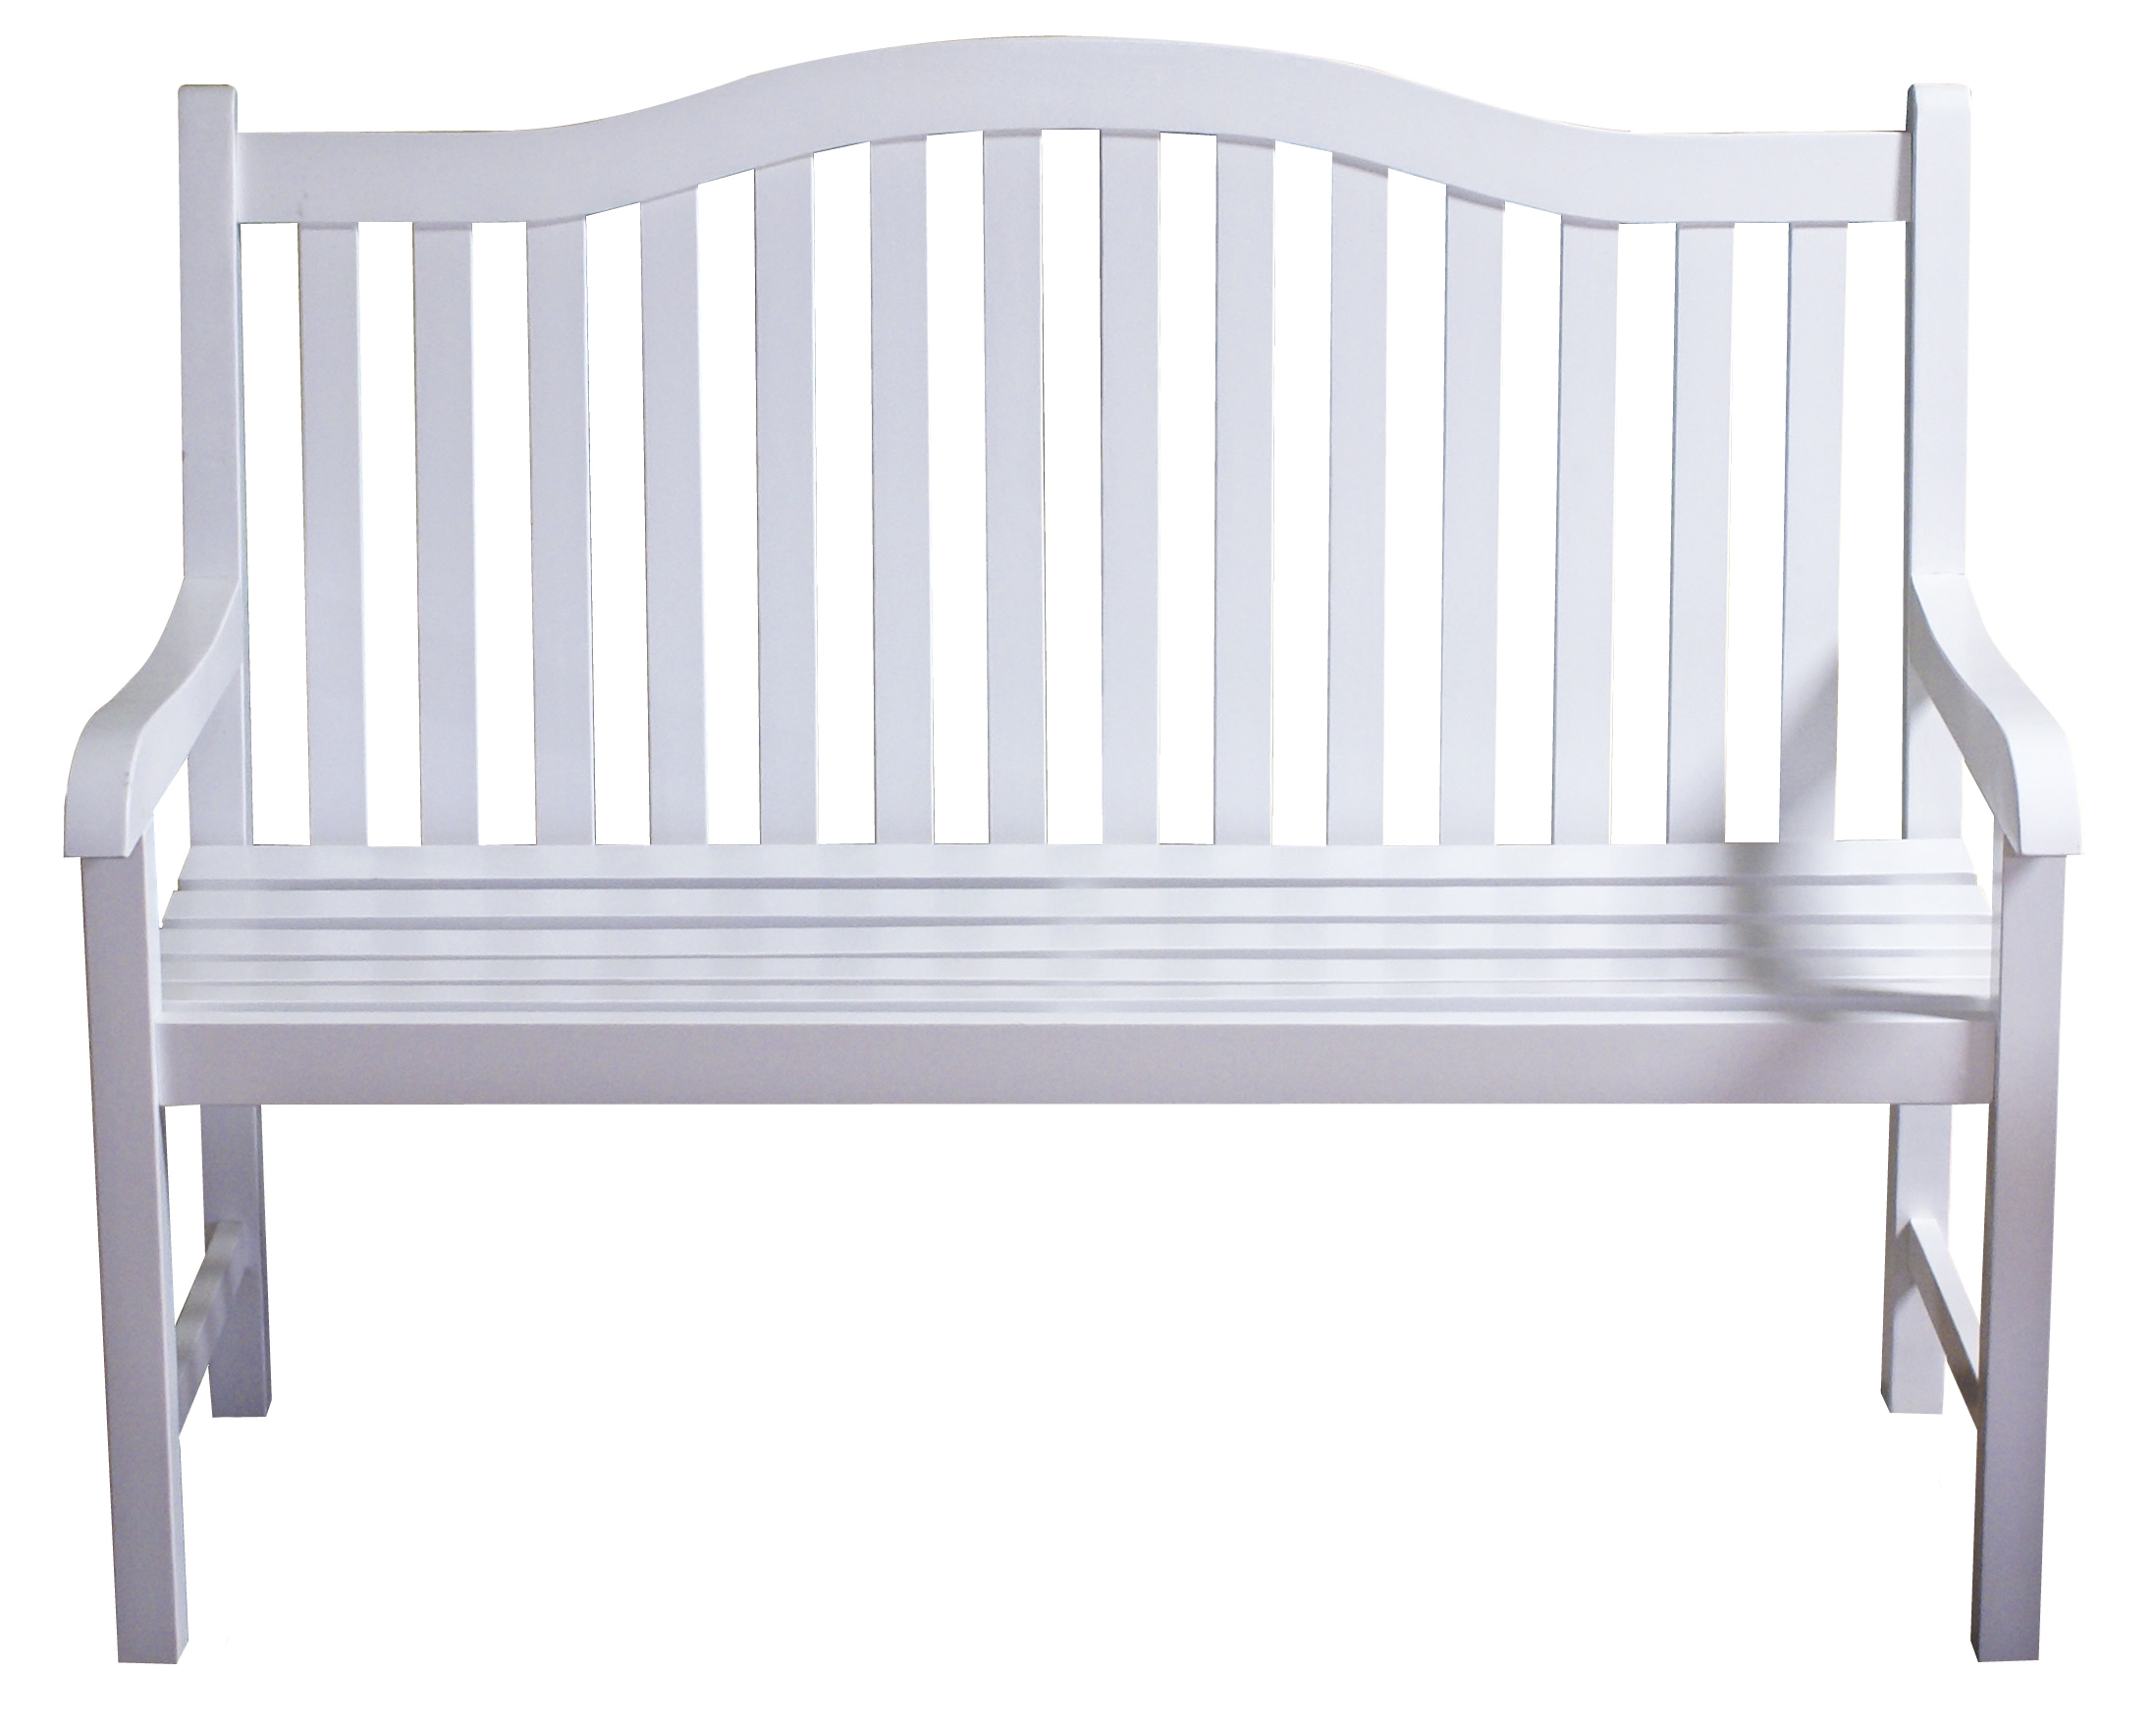 Bench : White Wood Bench Outdoor Seat Benches With Back Ana ...